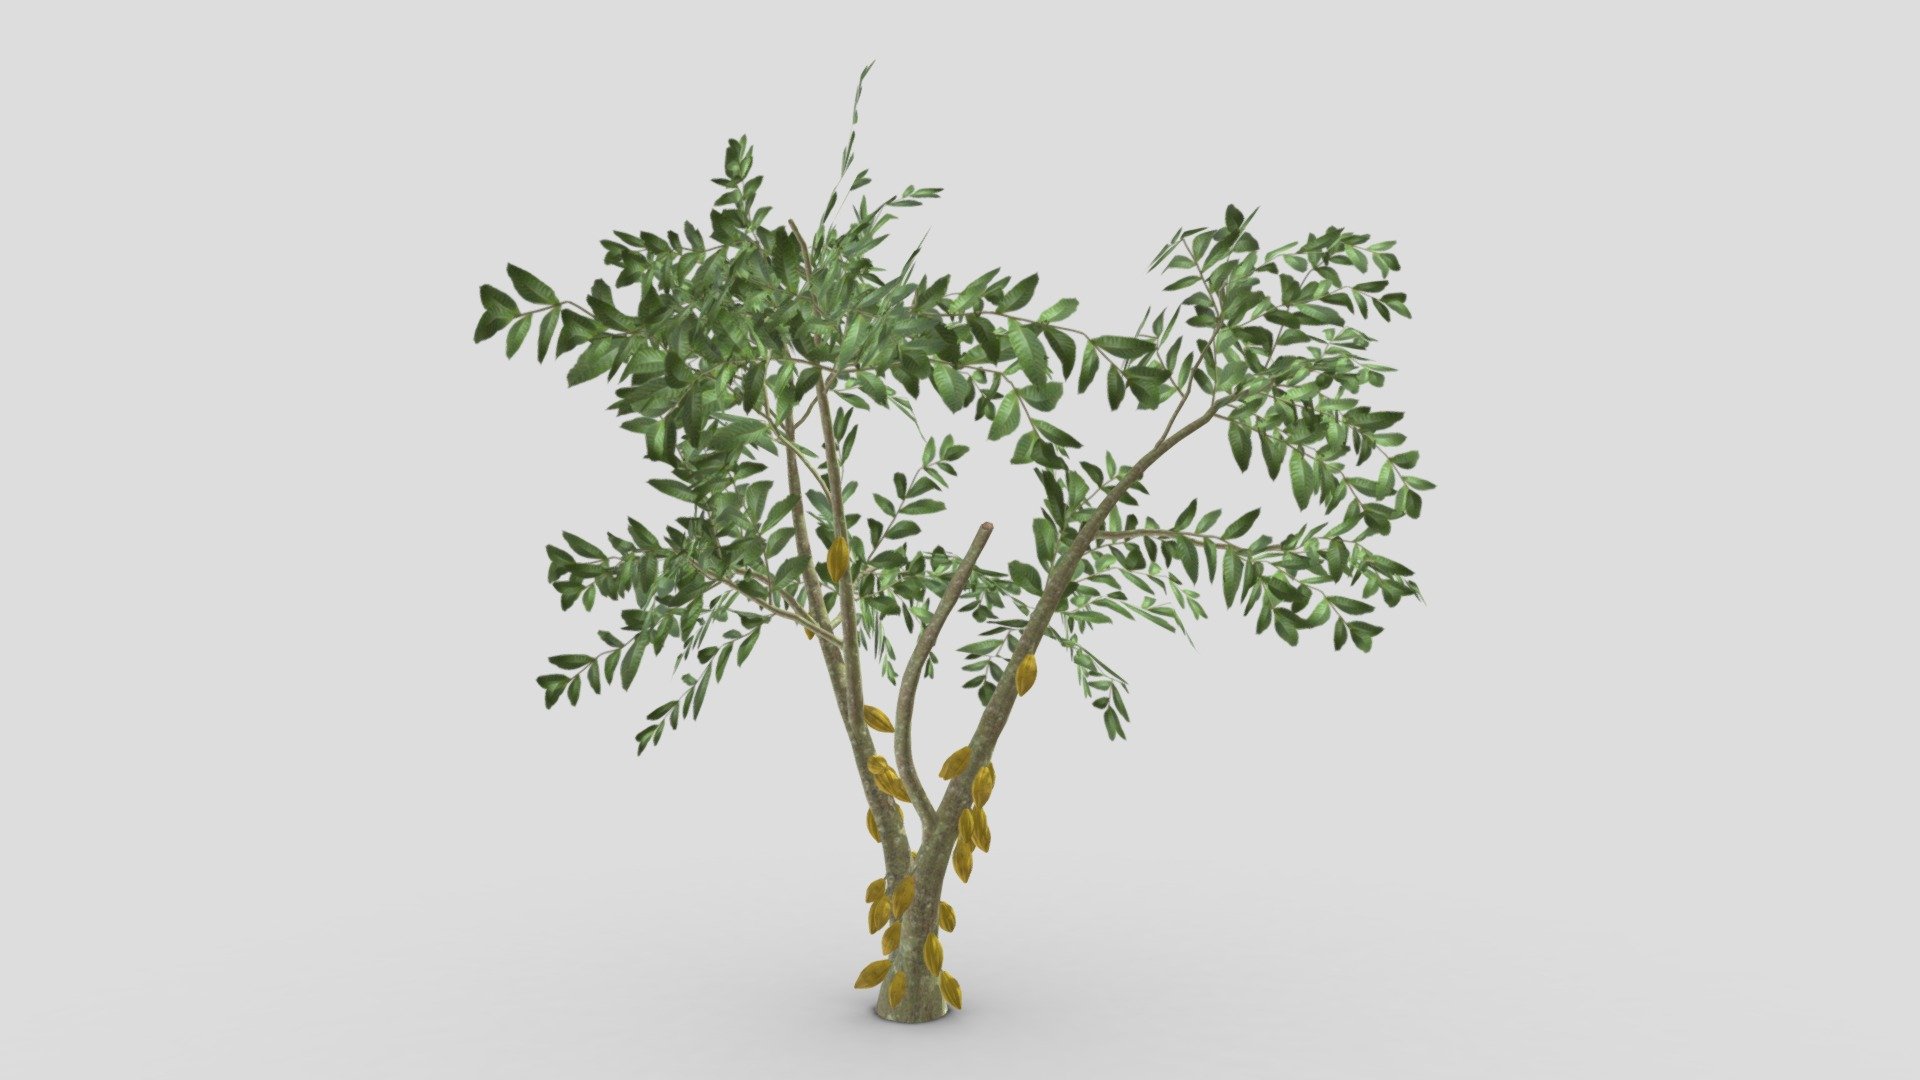 This is a 3D low poly model of a Cacao tree that you can use in your projects.

Info:

Theobroma cacao is a small evergreen tree in the family Malvaceae. Its seeds, cocoa beans, are used to make chocolate liquor, cocoa solids, cocoa butter, and chocolate. Native to the tropics of the Americas, the largest producer of cocoa beans in 2018 was Ivory Coast, at 2.2 million tons 3d model